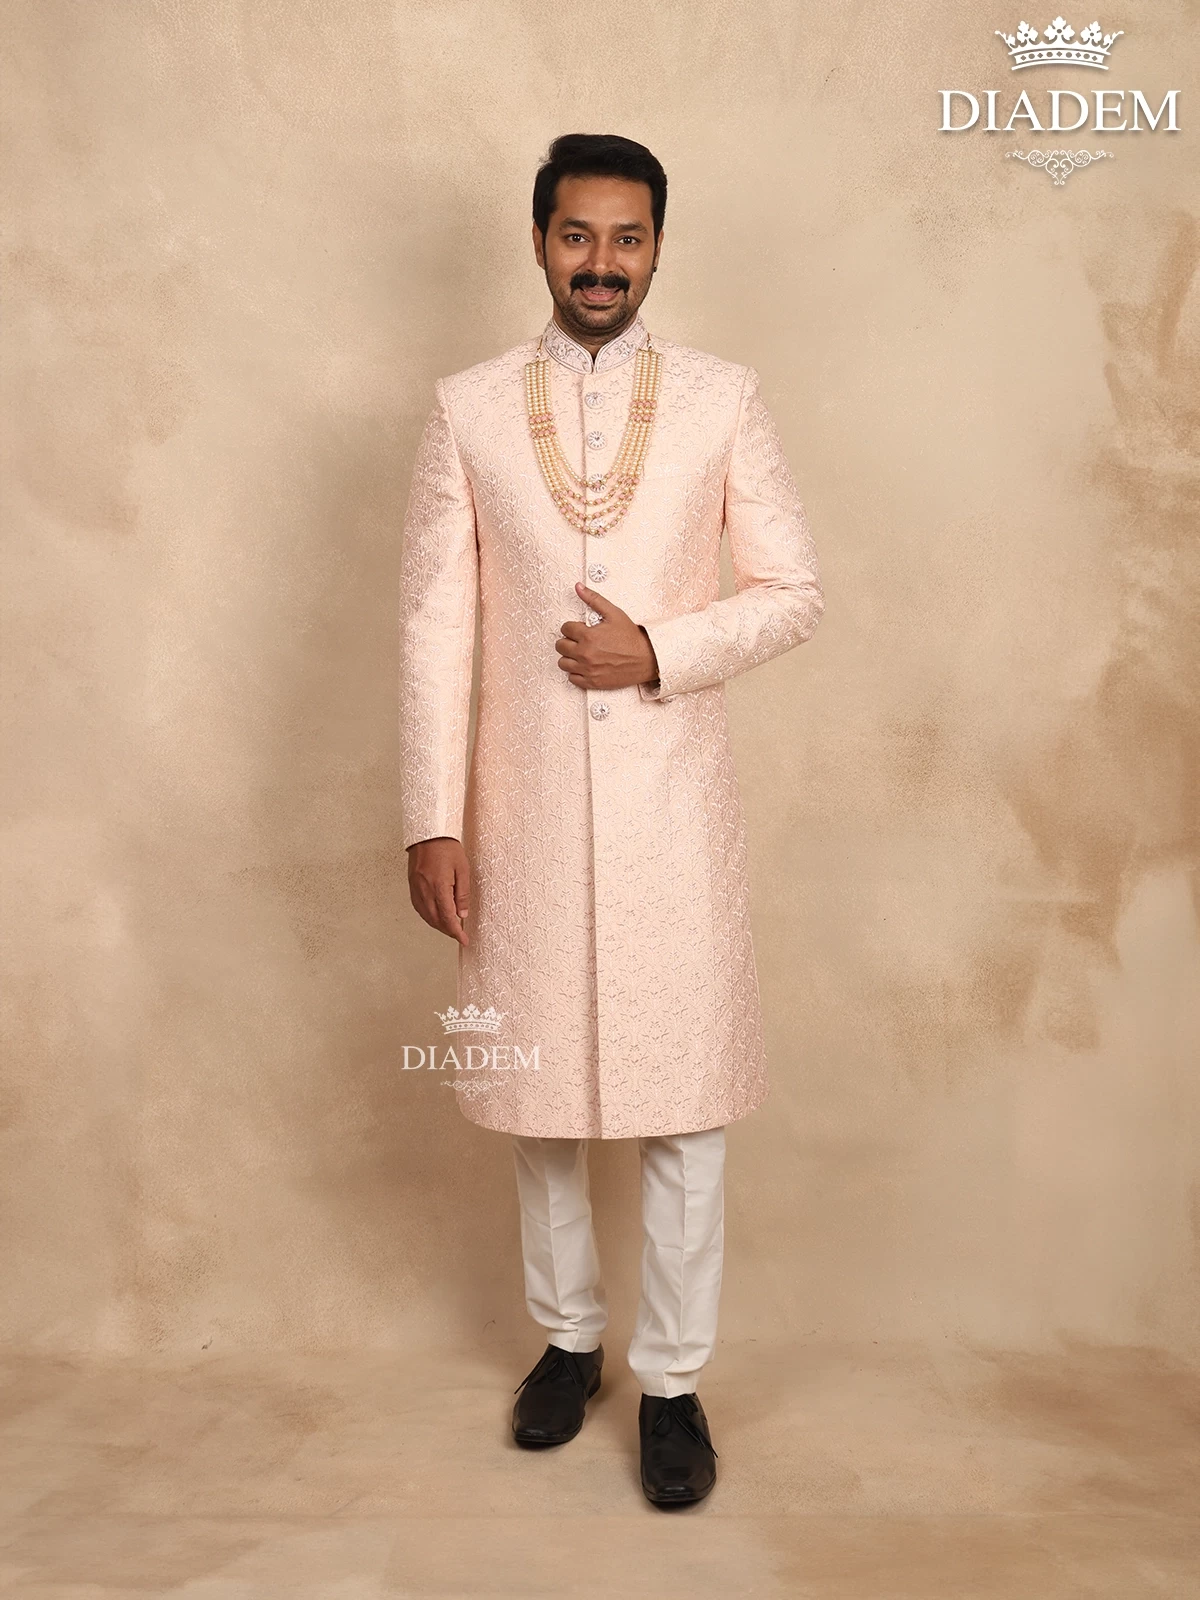 Light Peach Raw Silk Sherwani Suit Adorned with Floral Threadwork Embroidery, Paired with Bead Mala